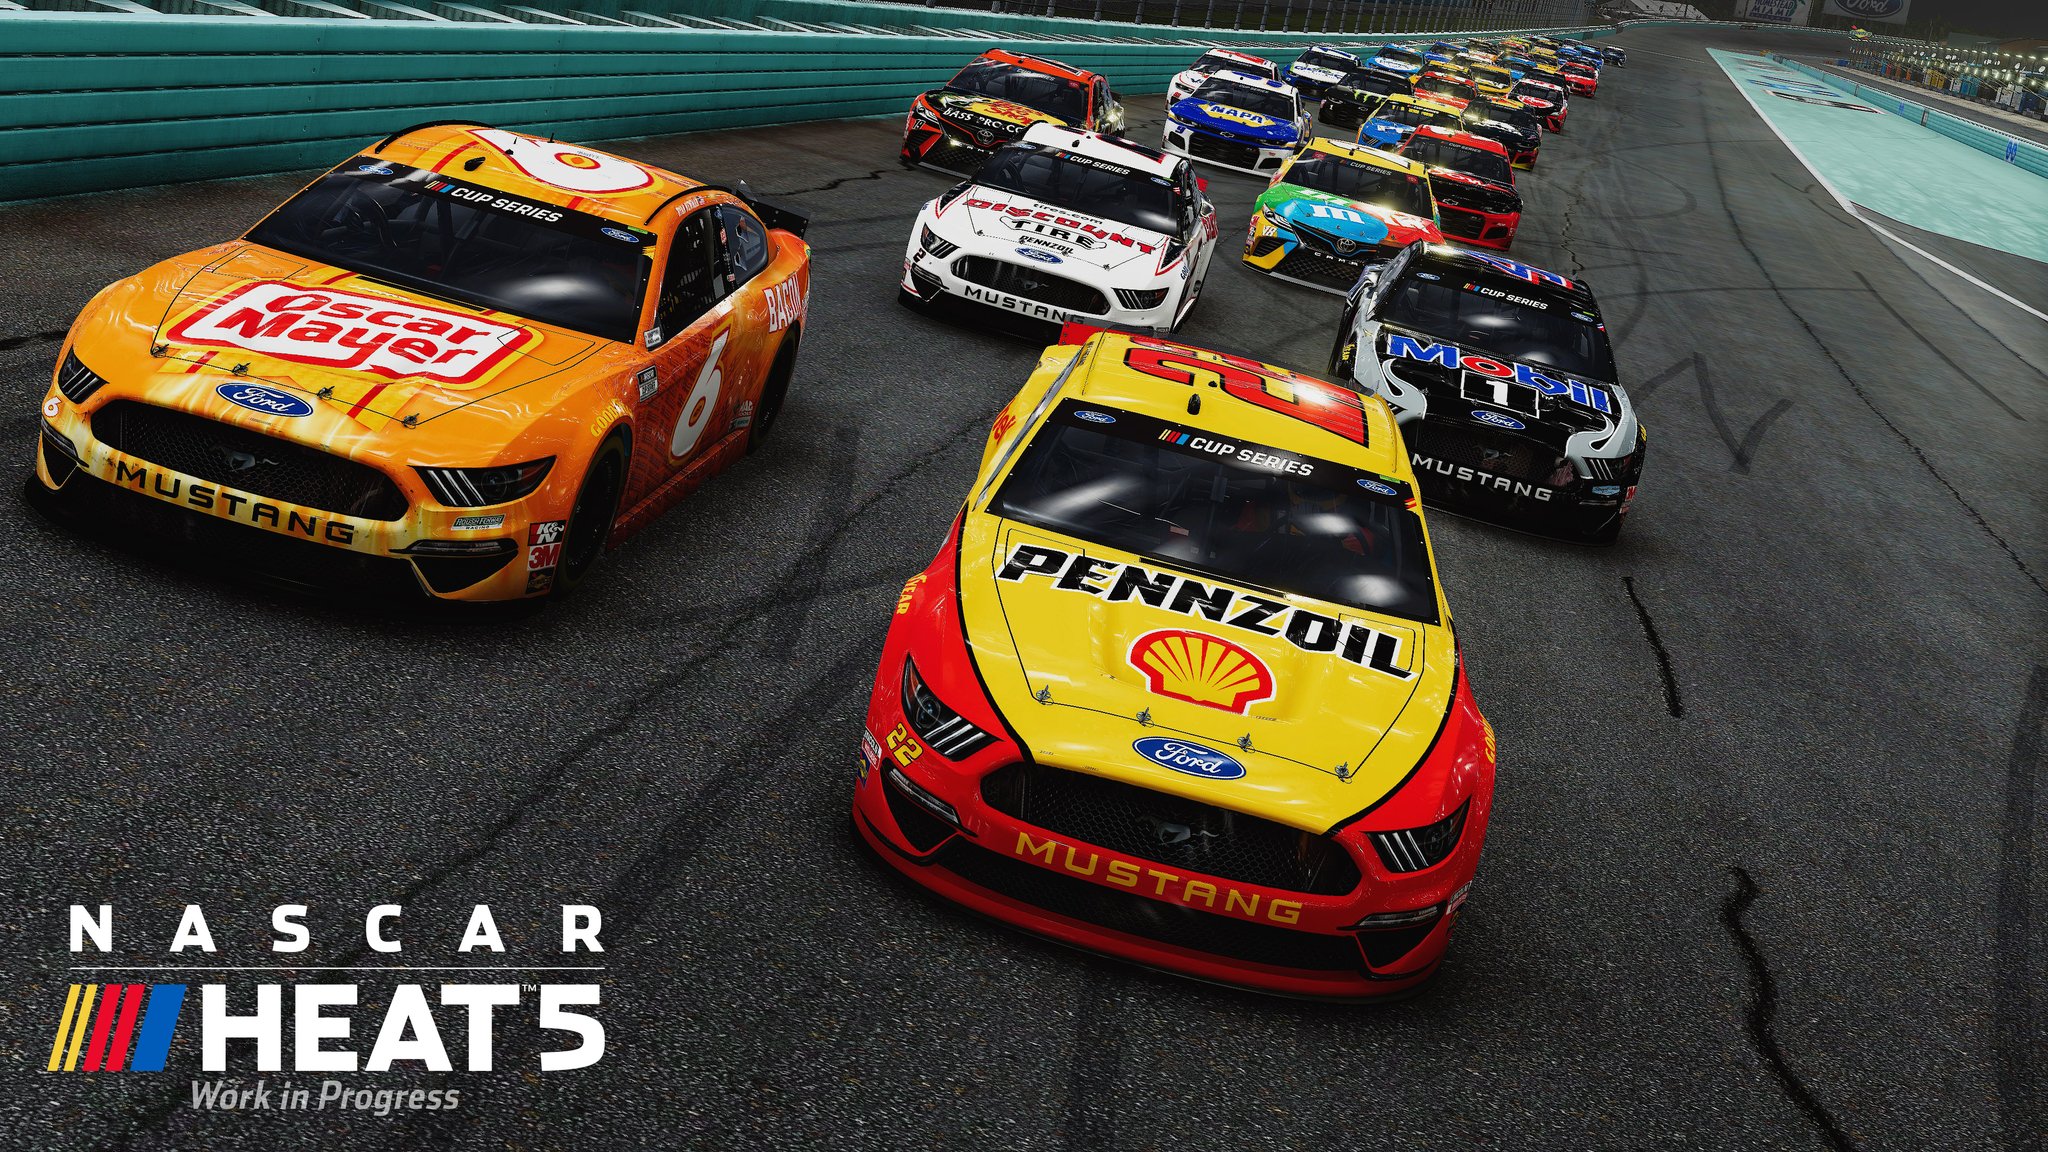 Play NASCAR Heat 5 Free Through the Weekend with Xbox Live Free Play Days